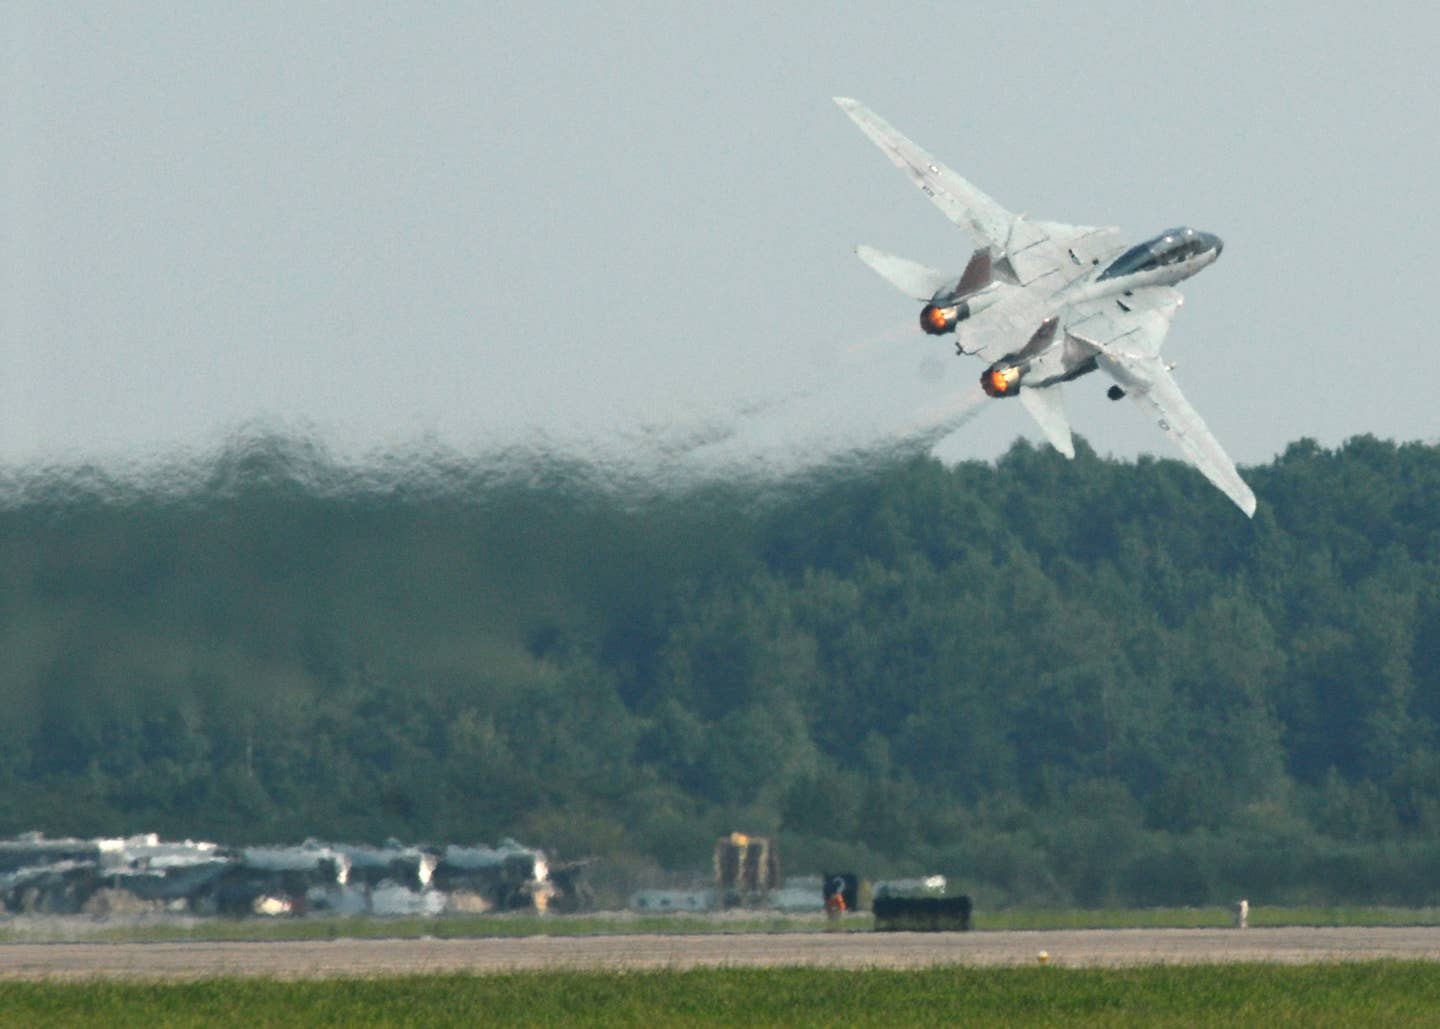 An F-14D takes off for the last demonstration ever.  U.S. Navy photo by Mass Communication Specialist 3rd Class Julian R. Moorefield III.